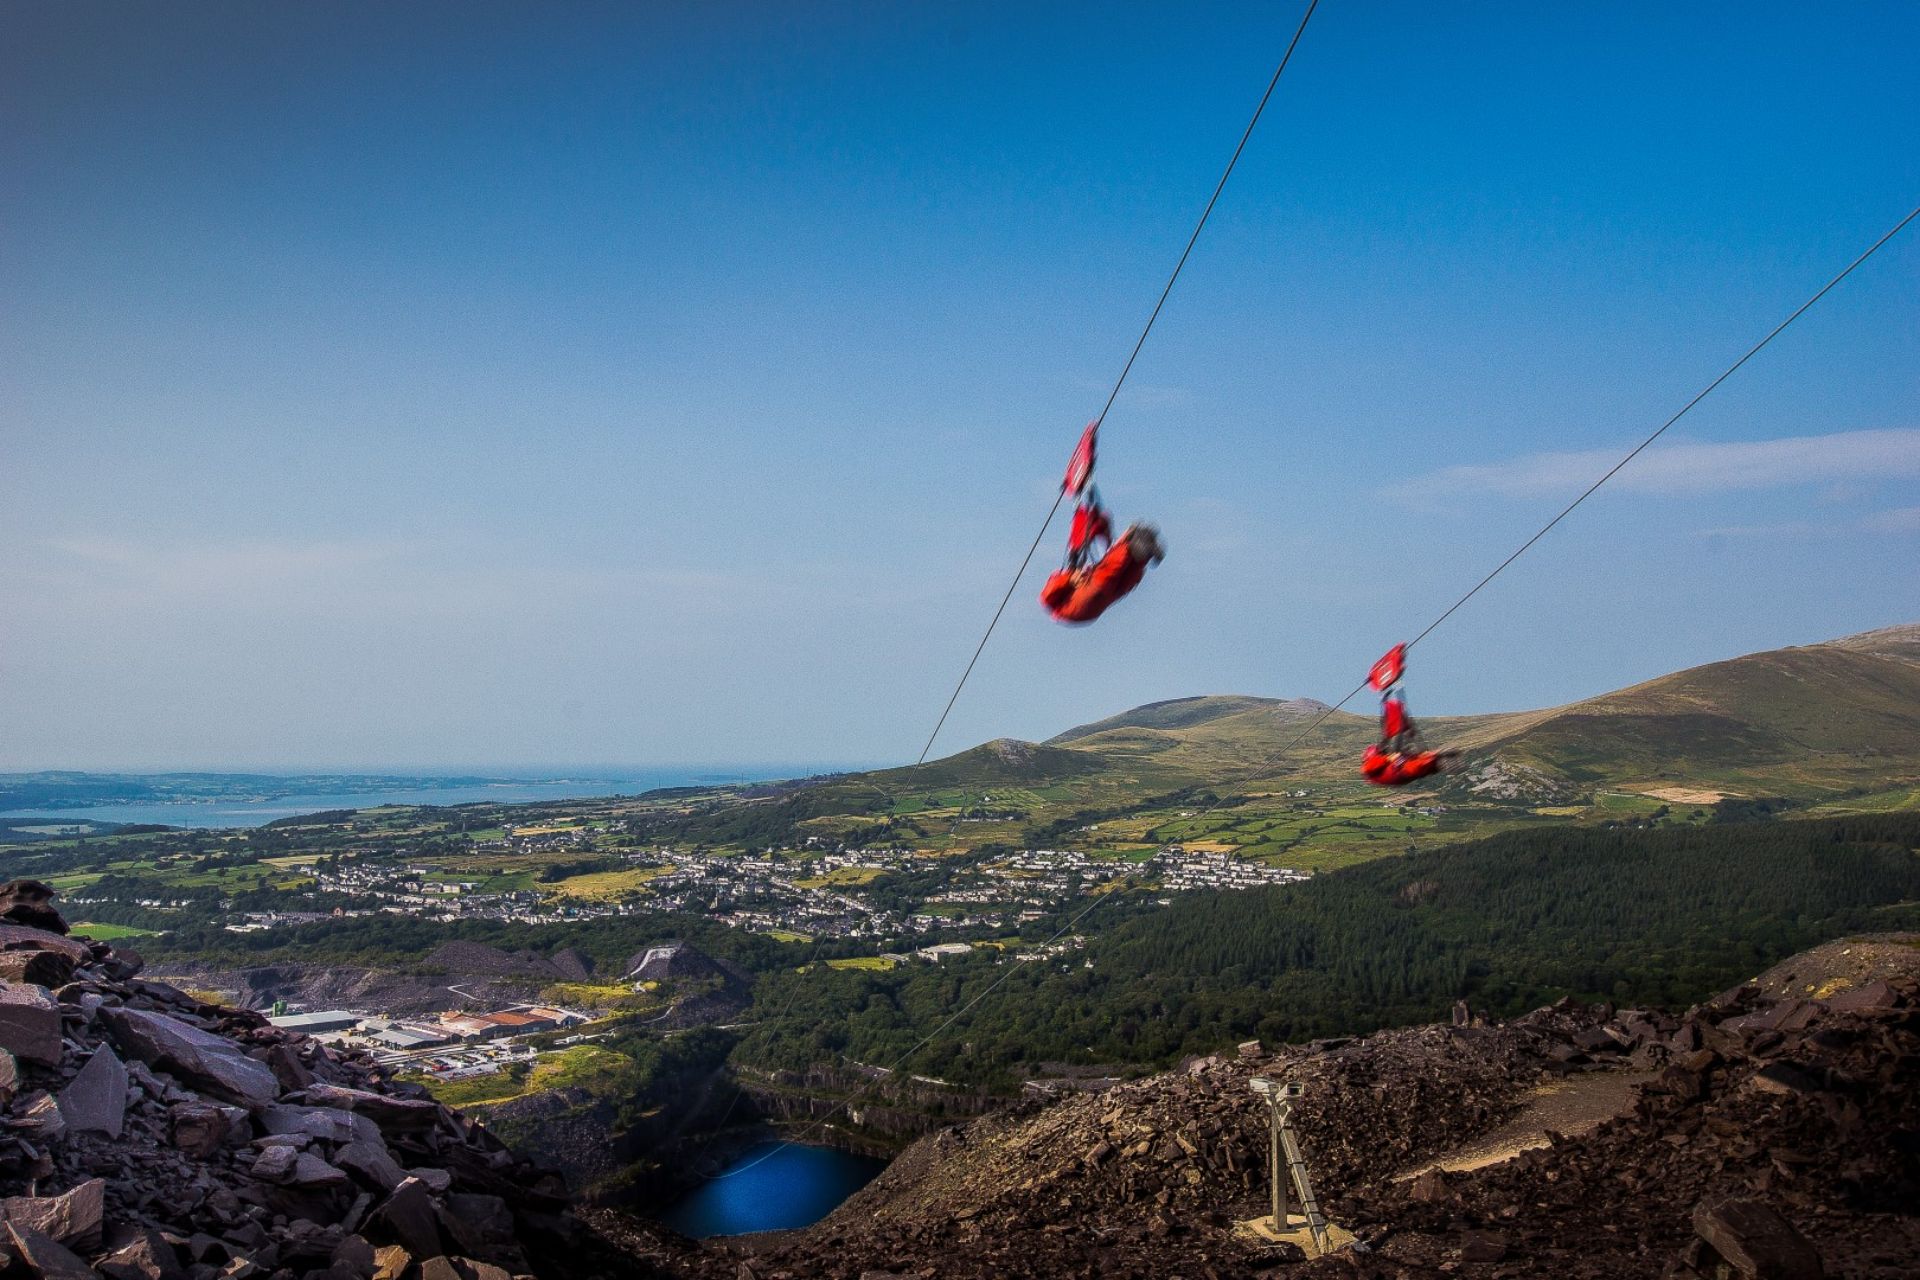 people-in-red-overalls-on-the-fastest-zip-line-in-the-world-going-over-a-quarry-in-the-mountains-north-wales-snowdonia-zip-world-outdoor-activities-wales